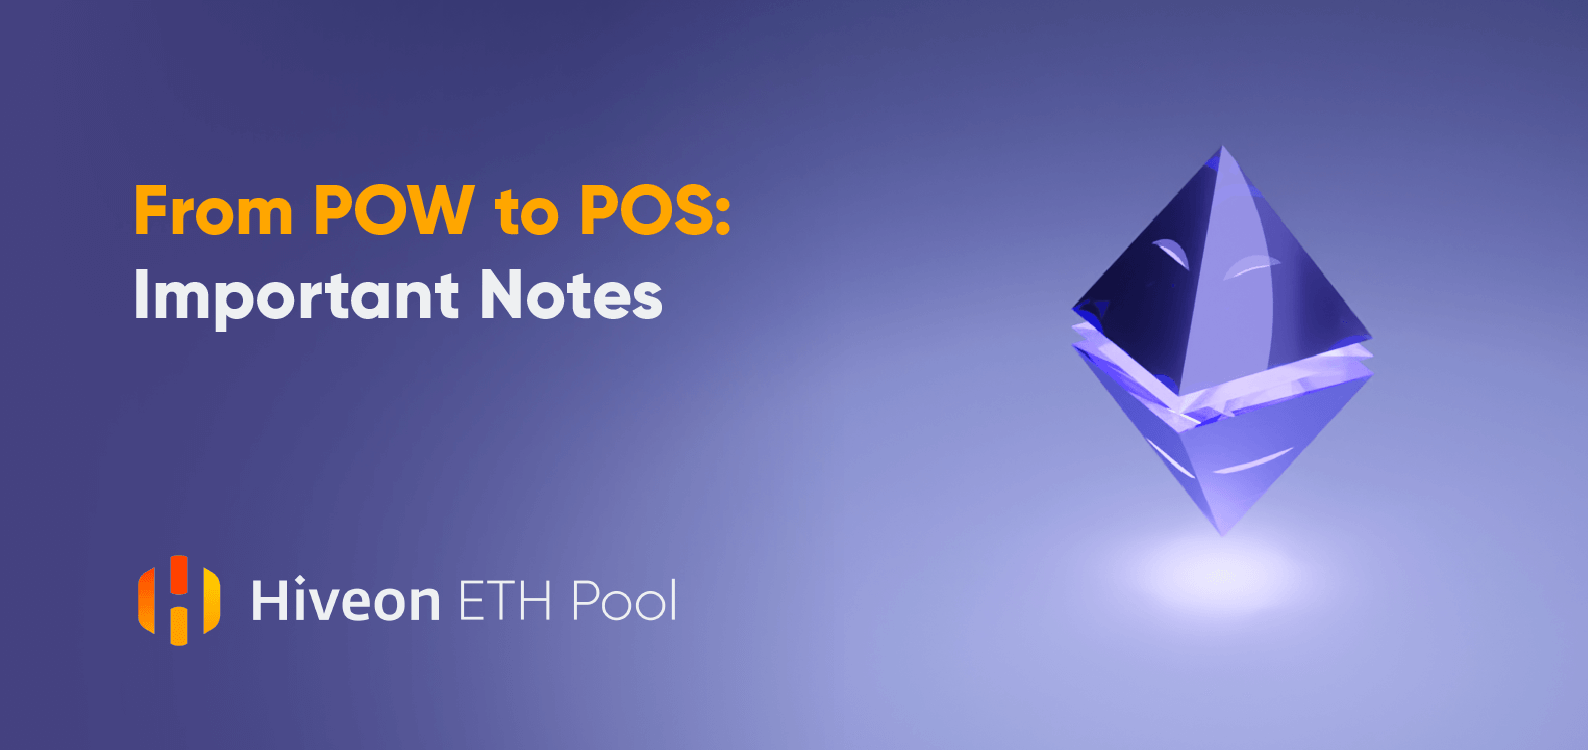 HiveOS — The POW to POS Transition: Important Notes for Hiveon Pool Users